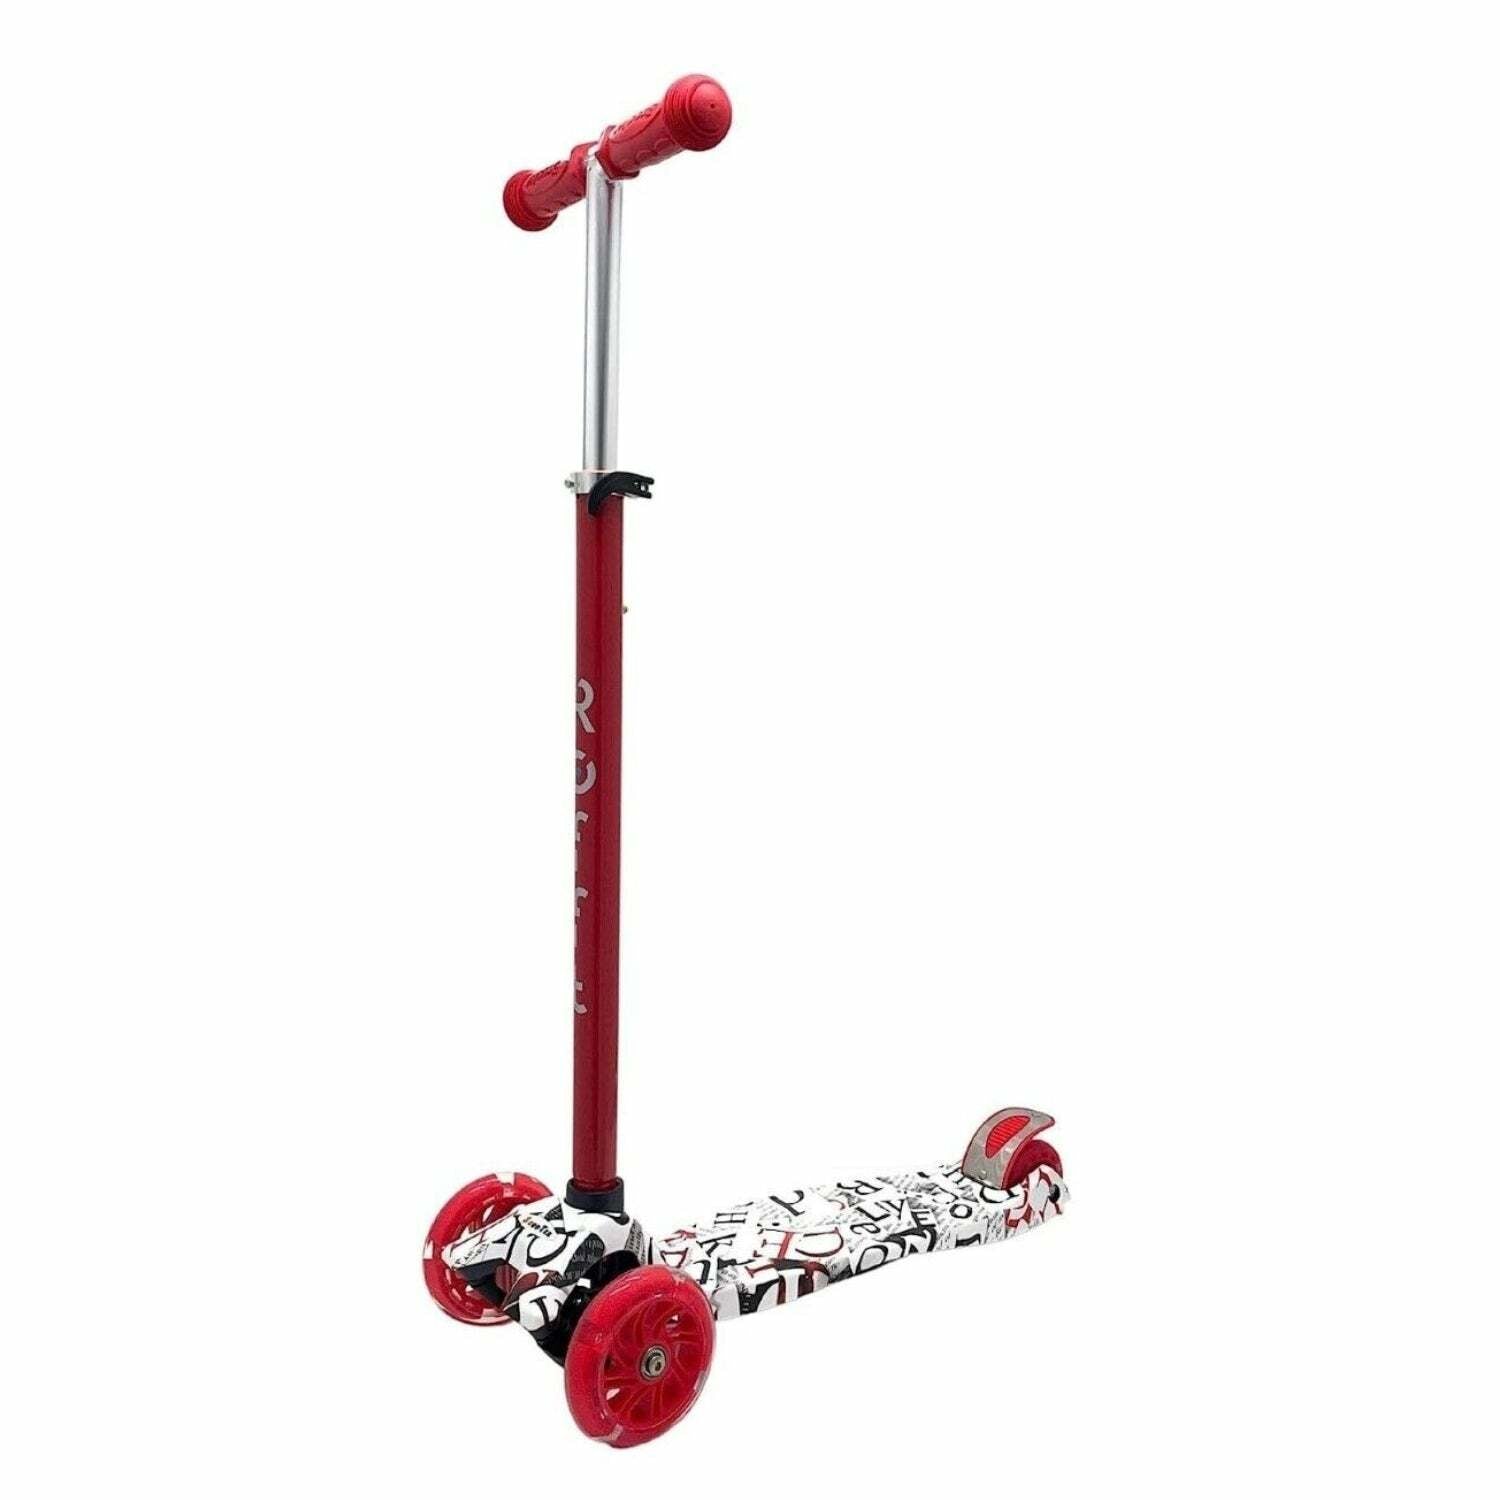 ROFFT - Kick Scooter Maxi, 3 Wheel, Lean-to-Steer, LED, Kids Ages 6-12 Graffiti Red